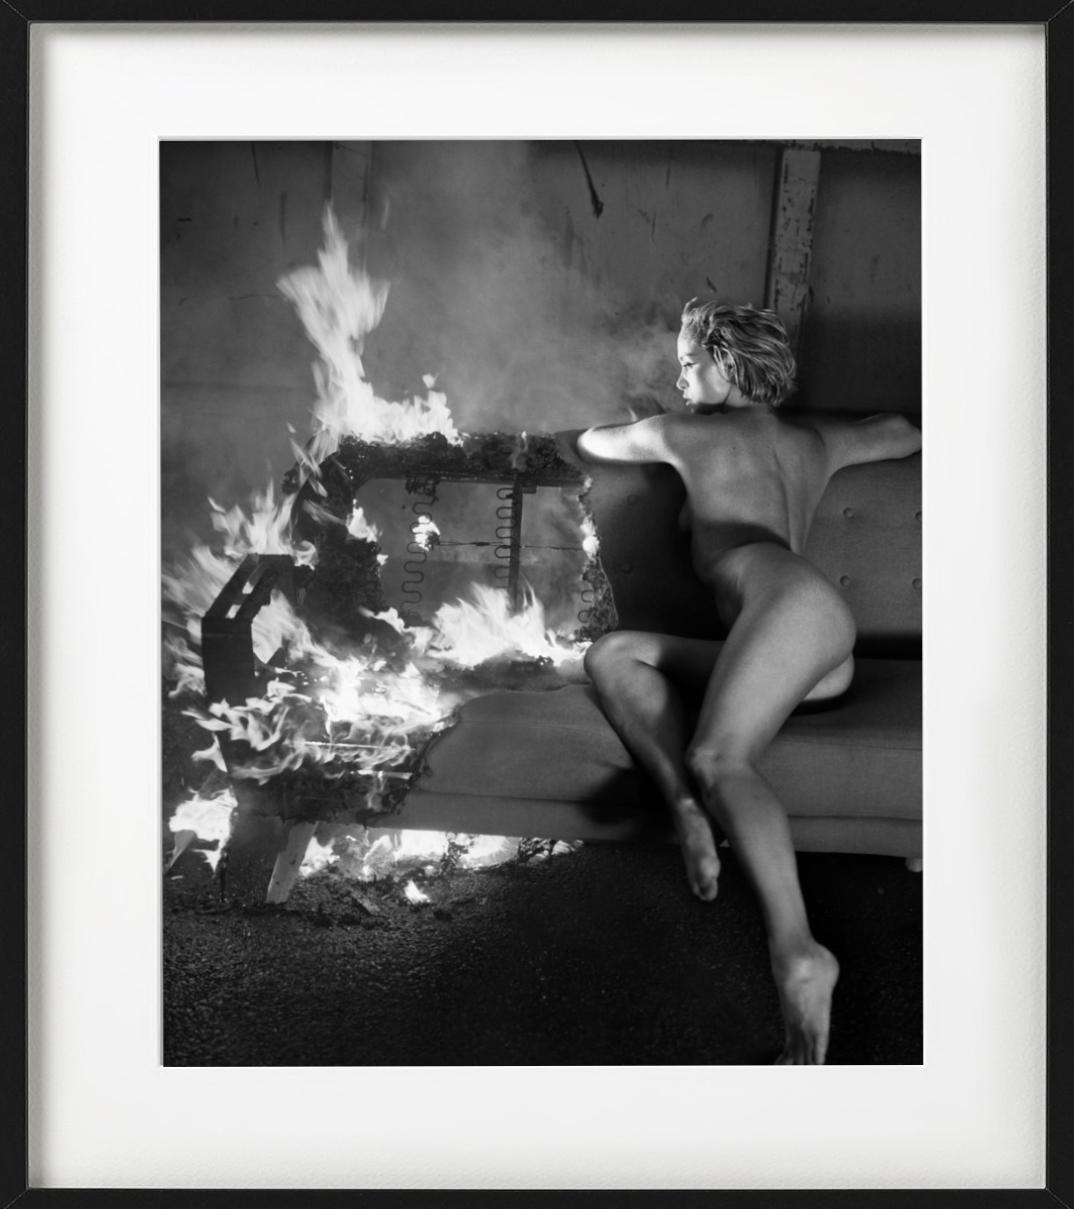 Victoria Fire for Playboy i- b&w photograph nude model sitting on a burning sofa - Photograph by Vincent Peters